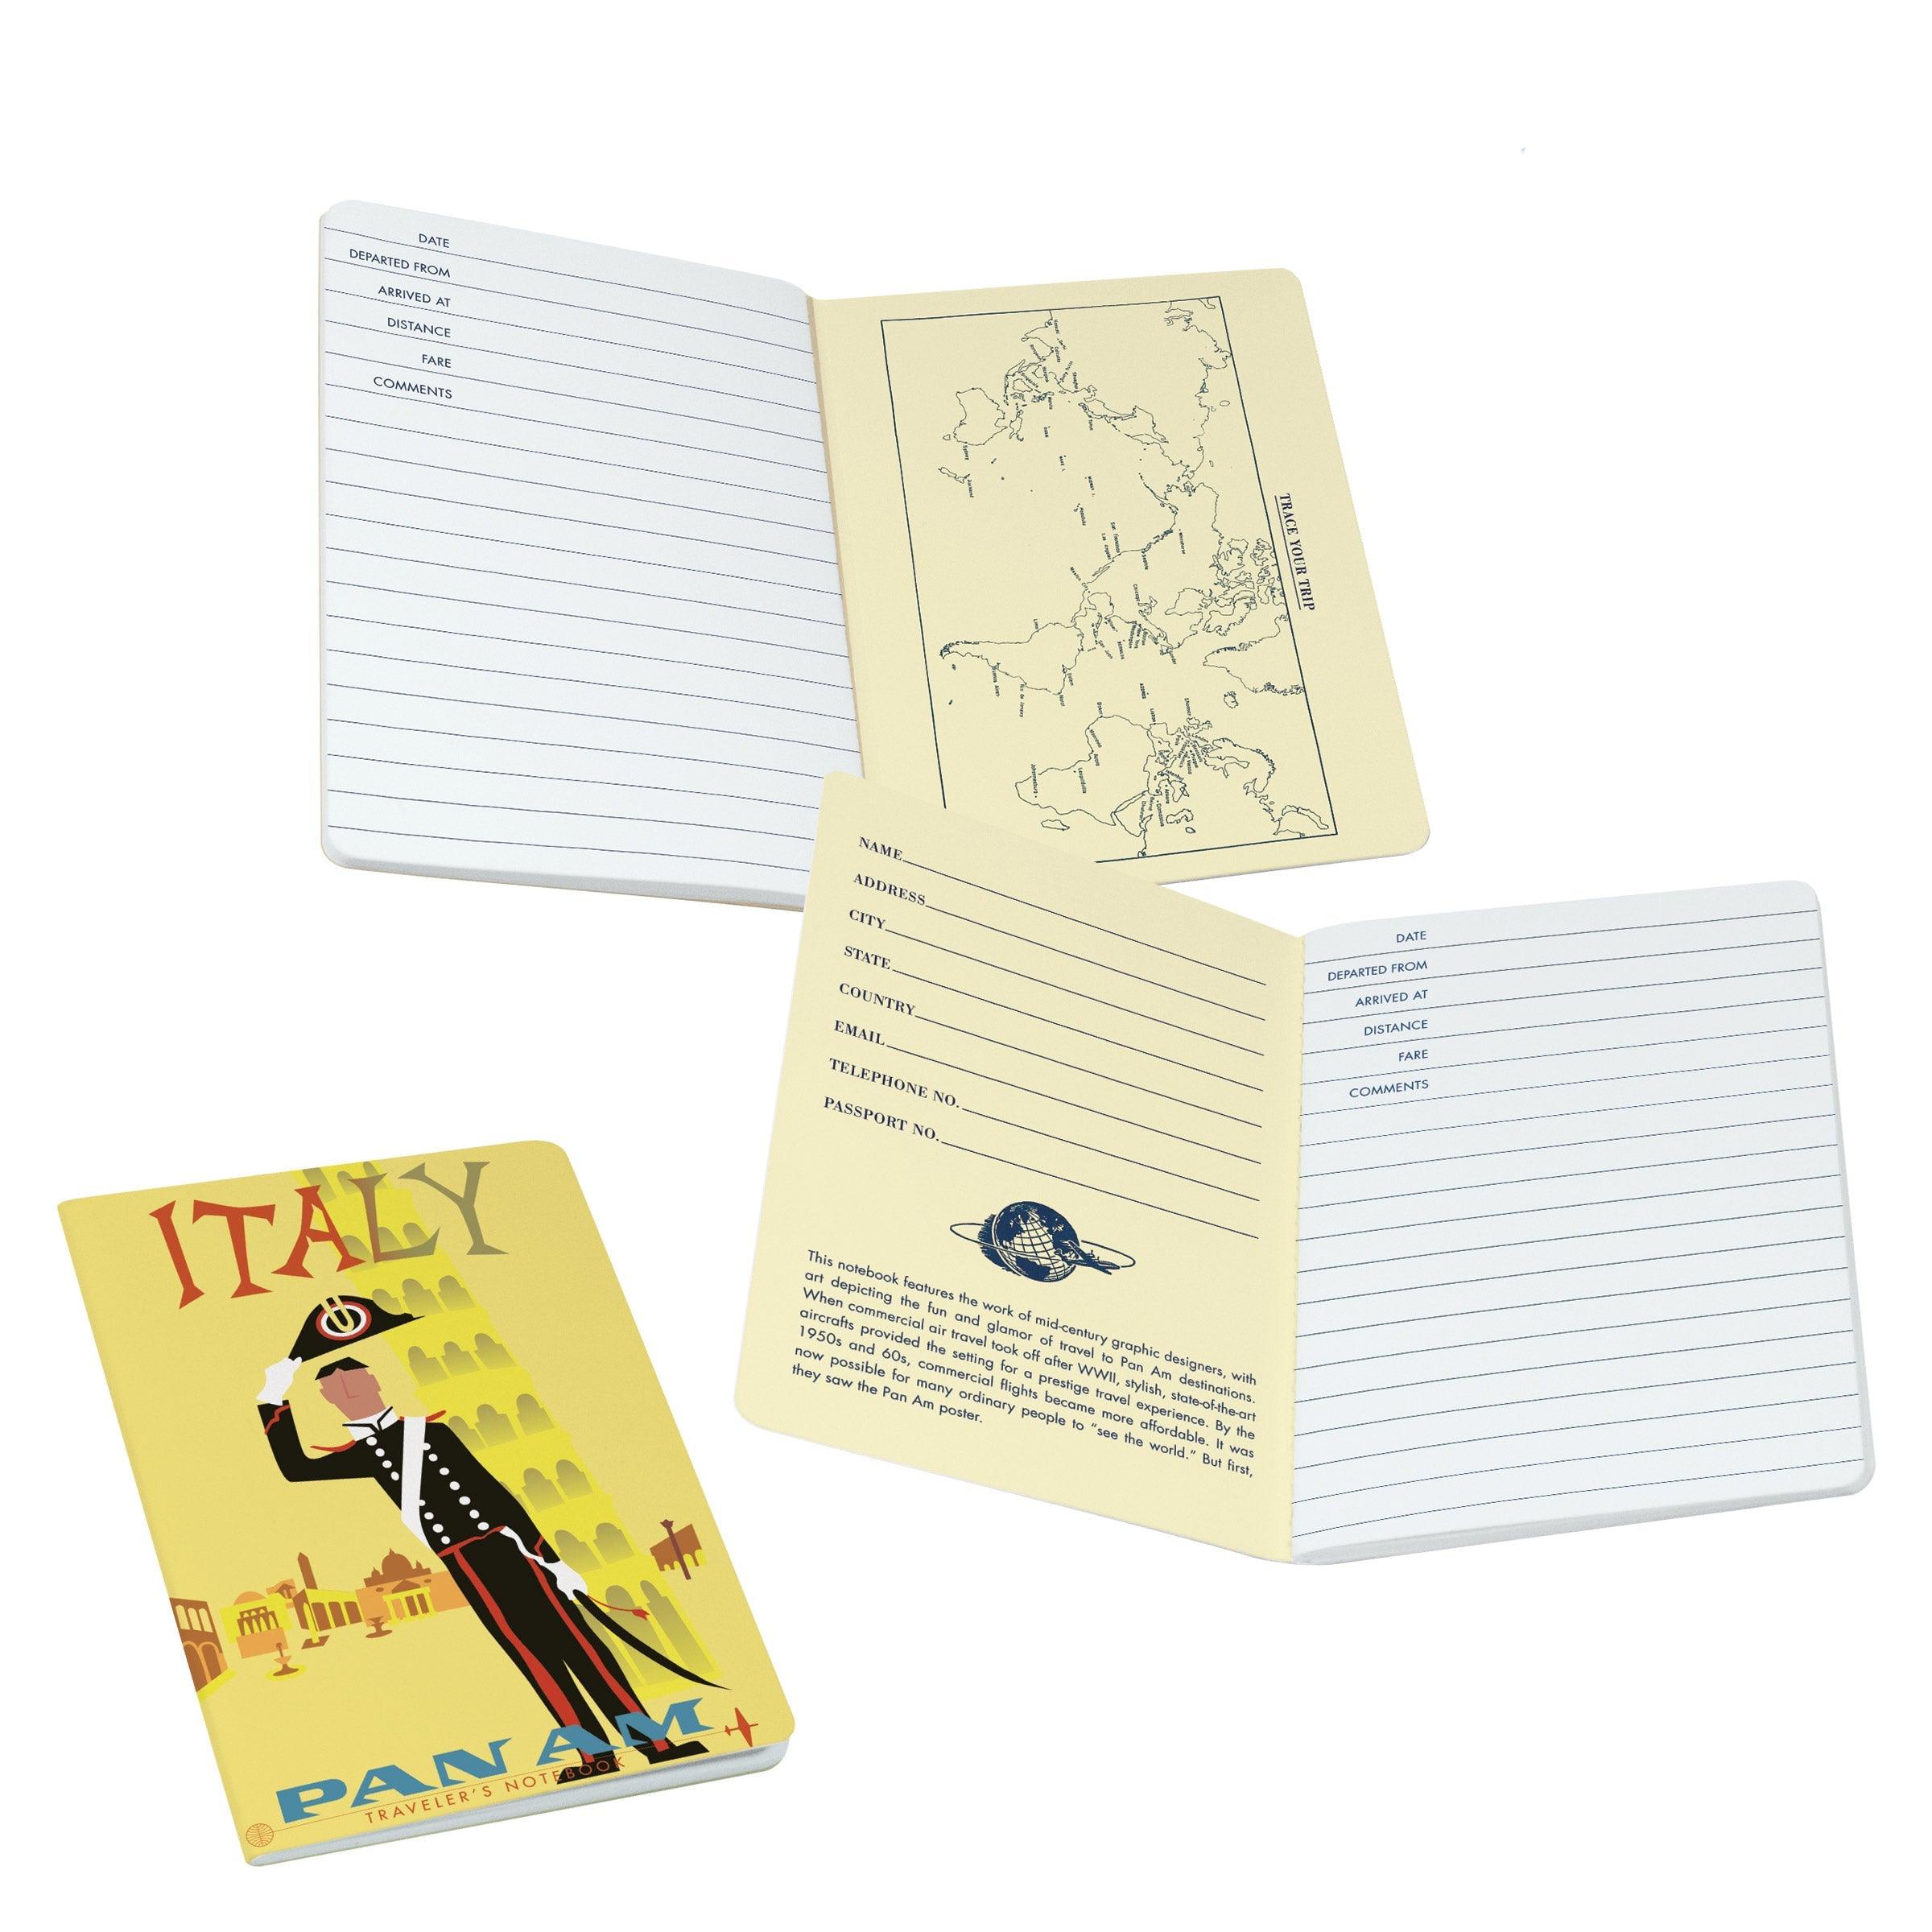 Product photo of Pan Am Italy Notebook, a novelty gift manufactured by The Unemployed Philosophers Guild.